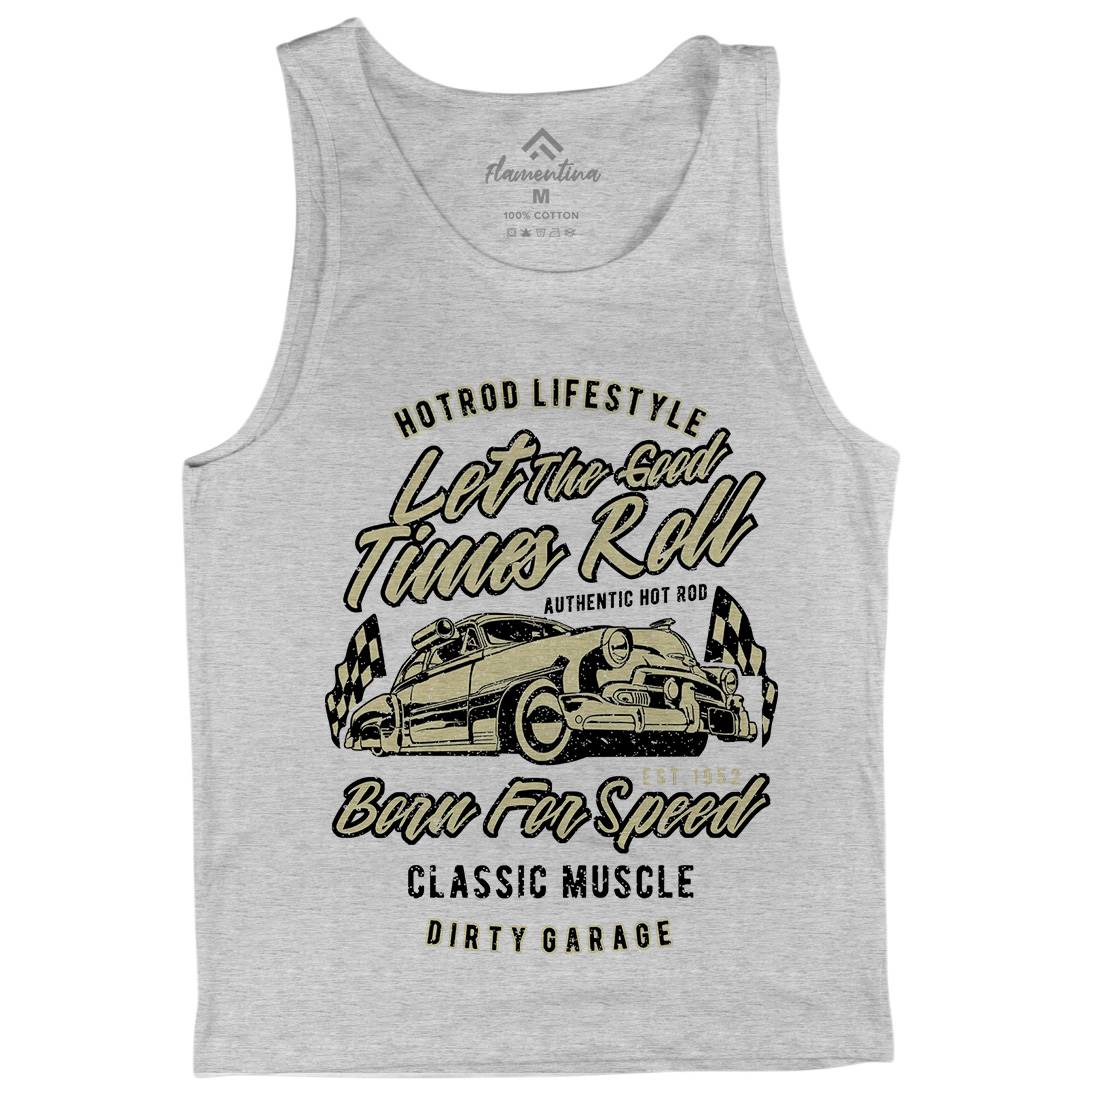 Let The Good Times Roll Mens Tank Top Vest Cars A705